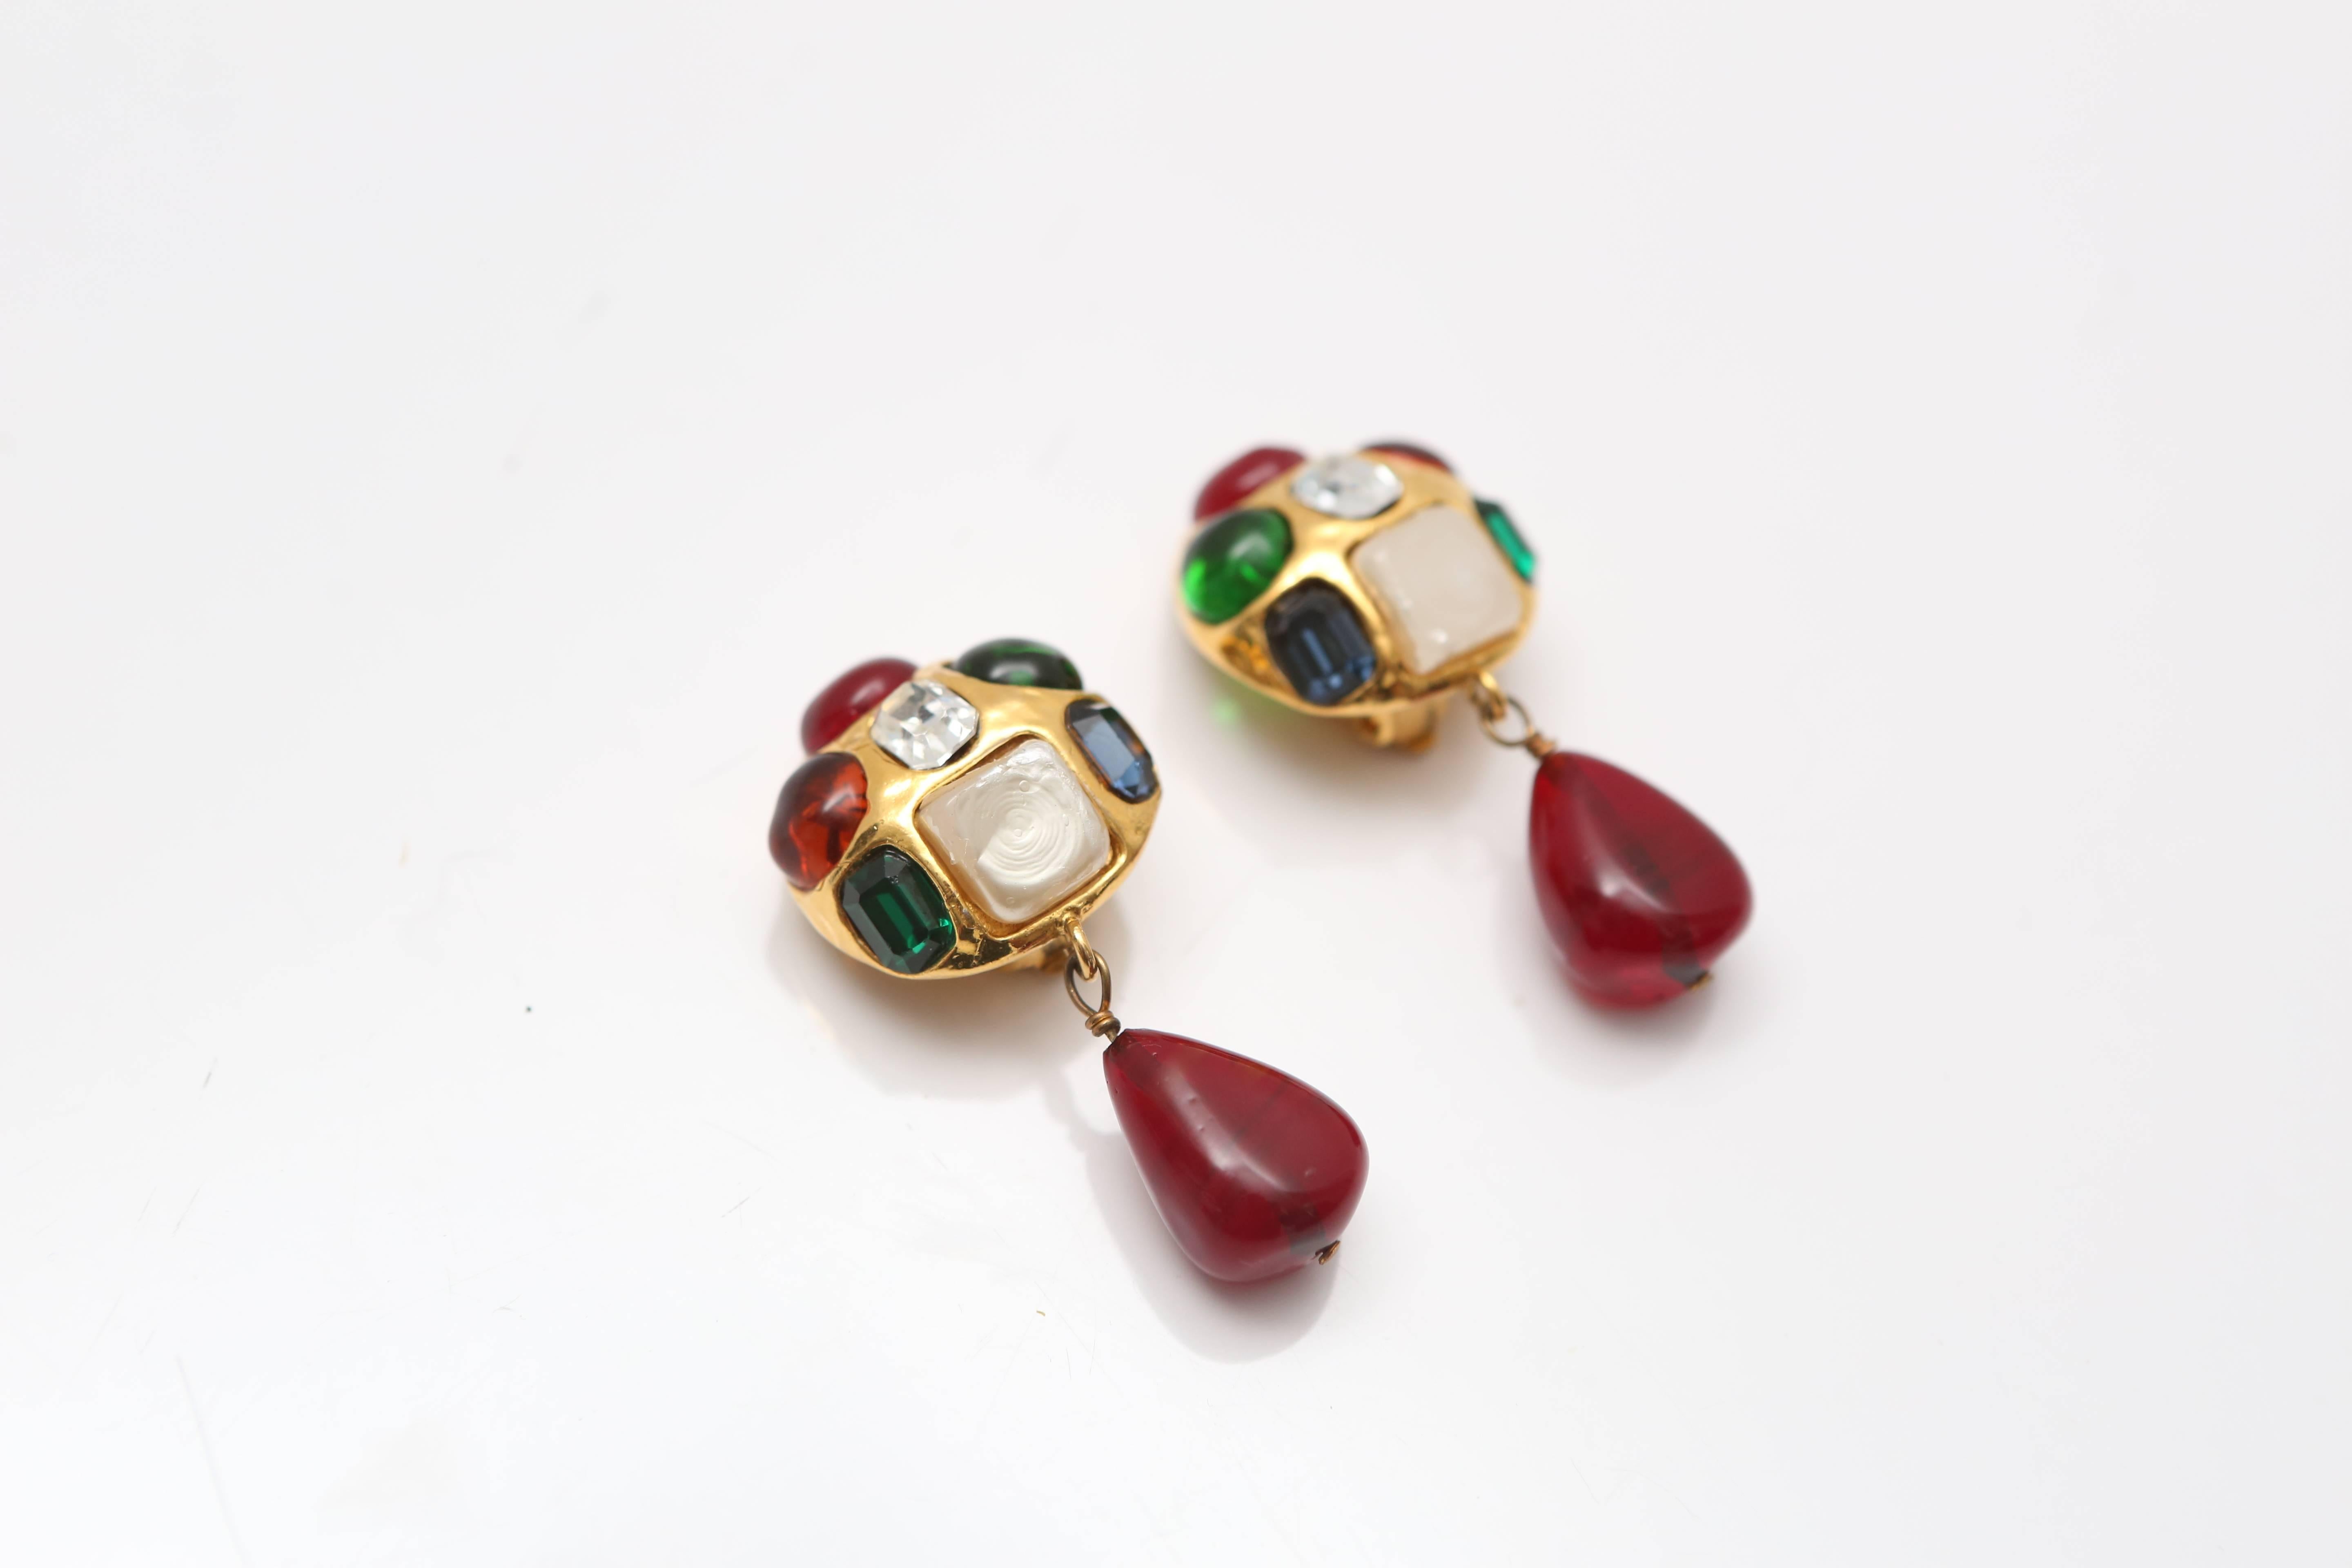 Clip on gold plated earrings with Gripoix glass stones.